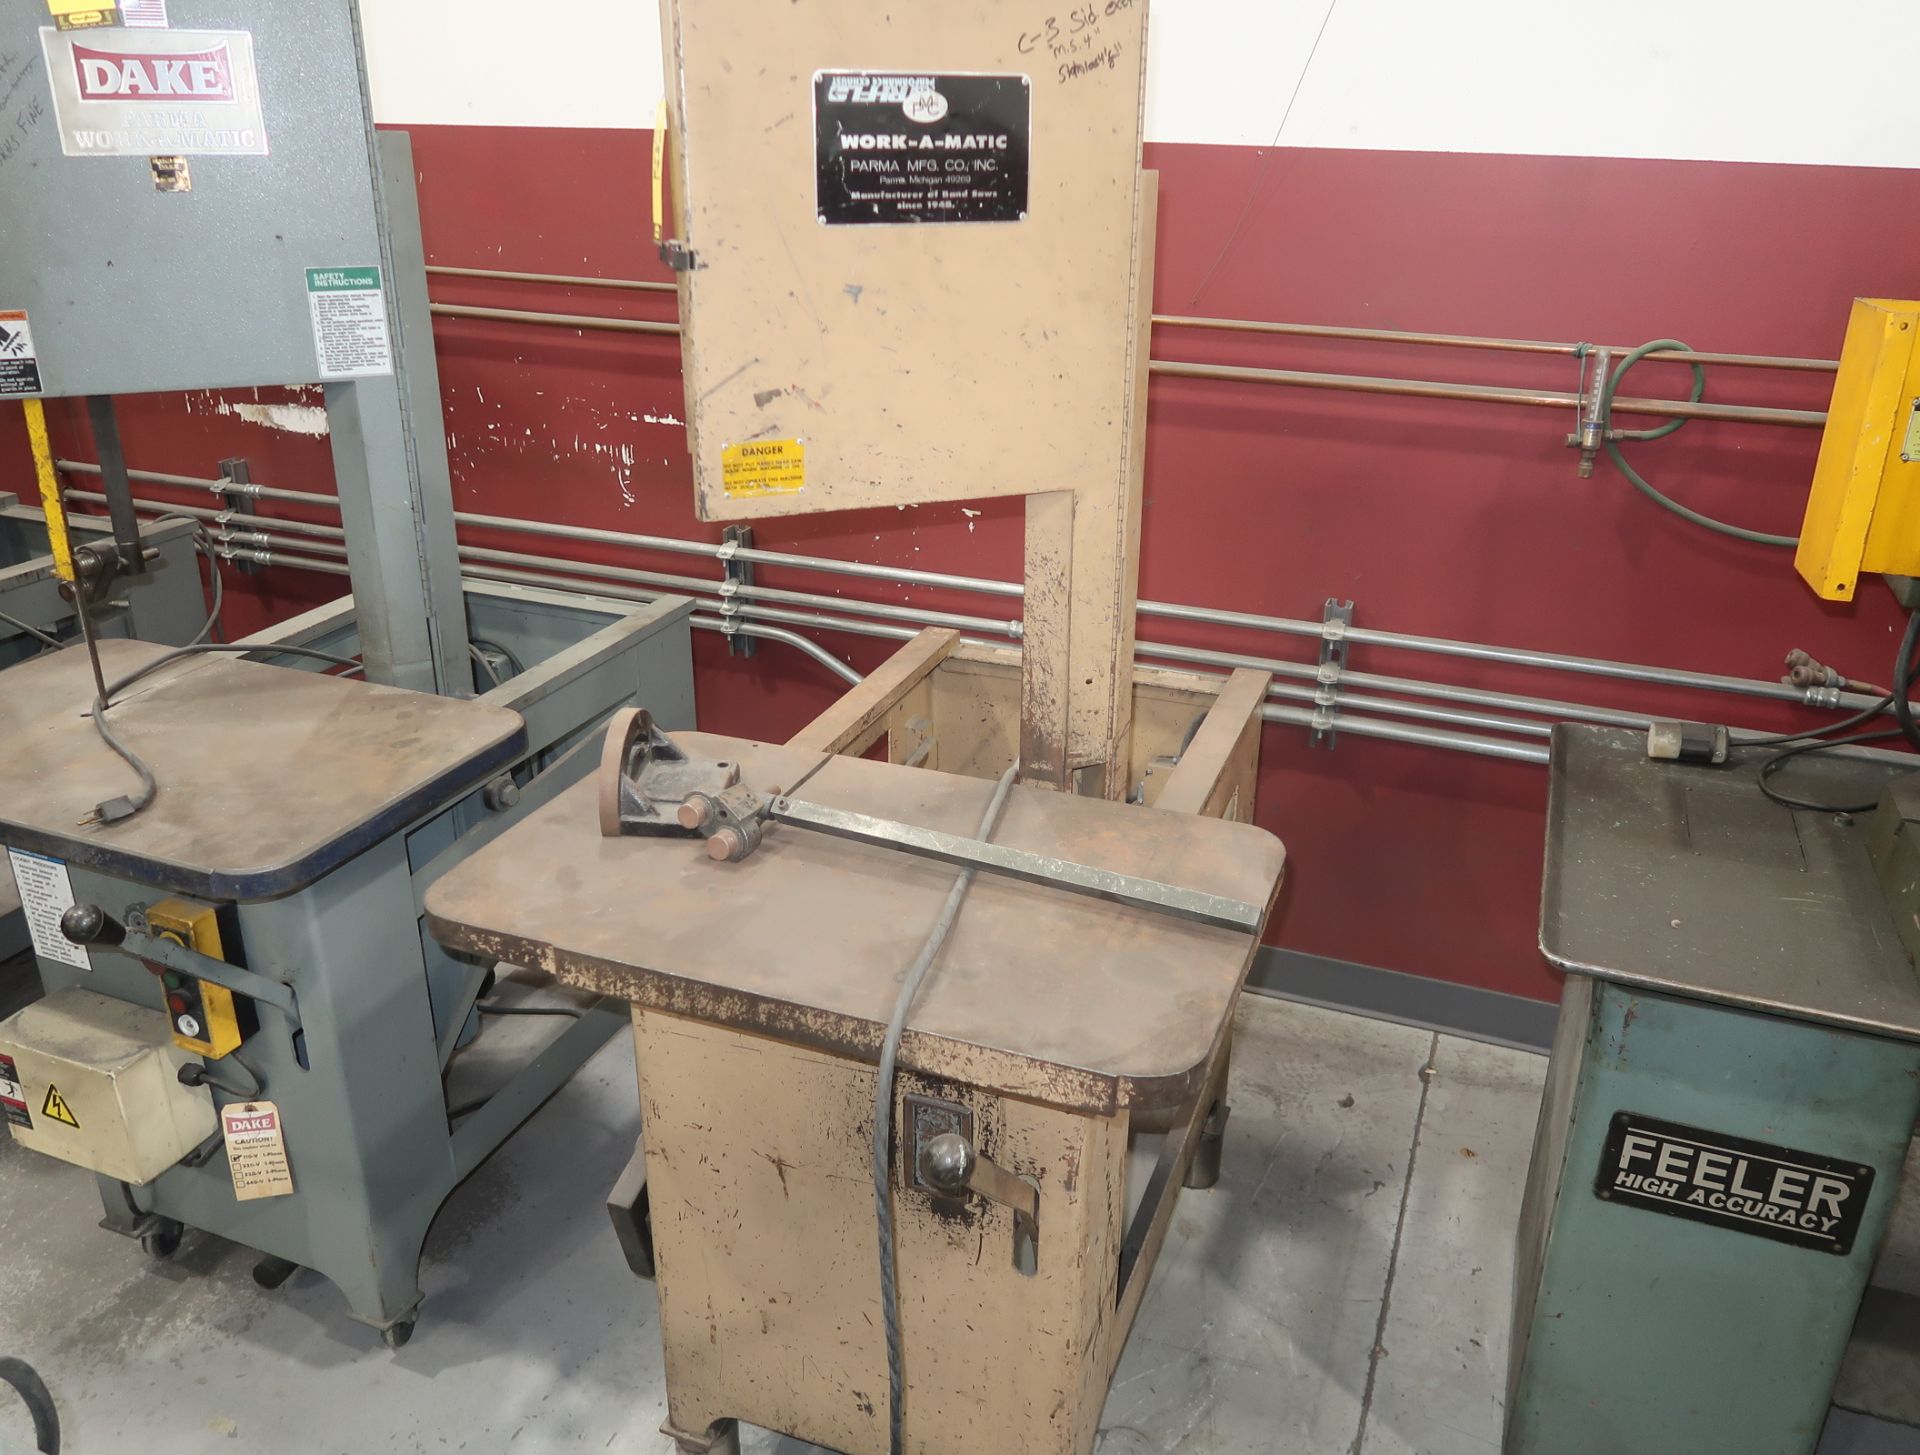 PMC WORK-A-MATIC BAND SAW